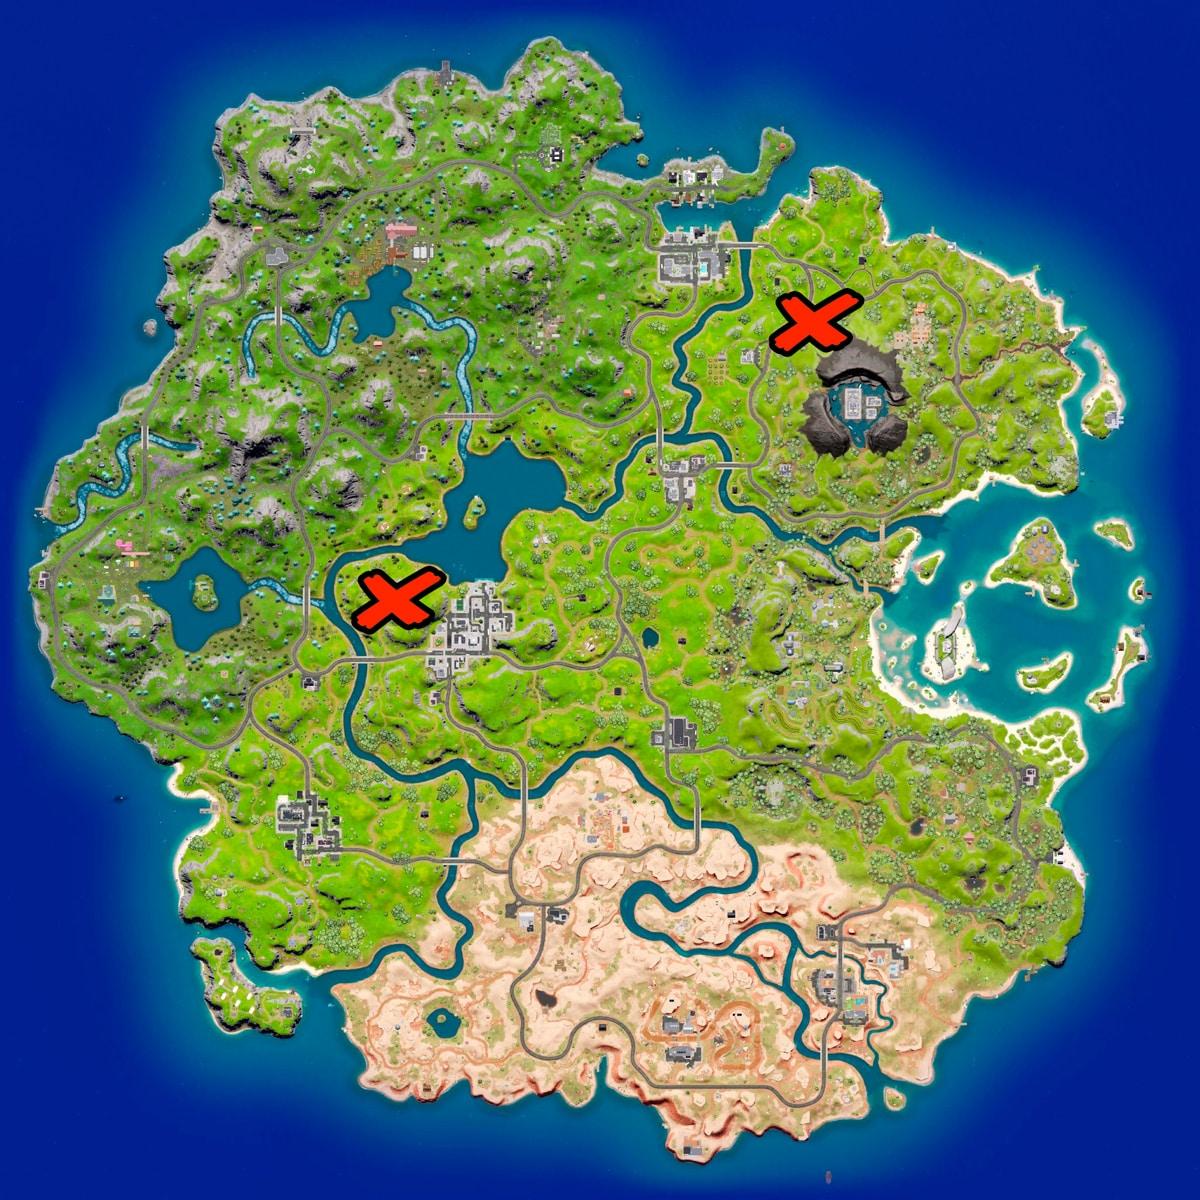 Klombo spawn locations marked on the Fortnite Chapter 3 map